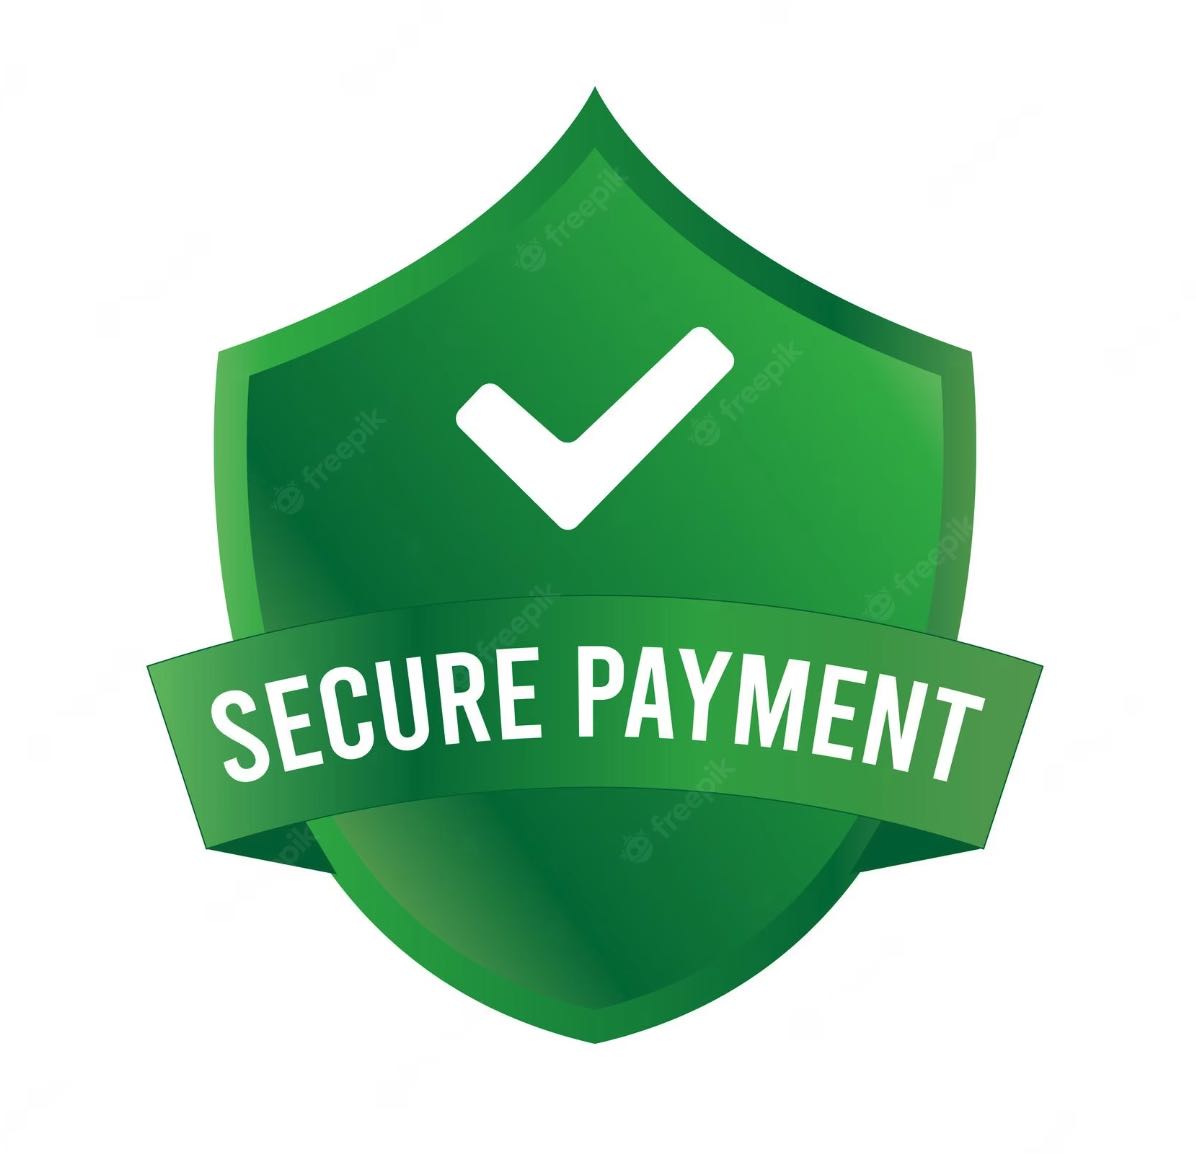 Secure payment logo